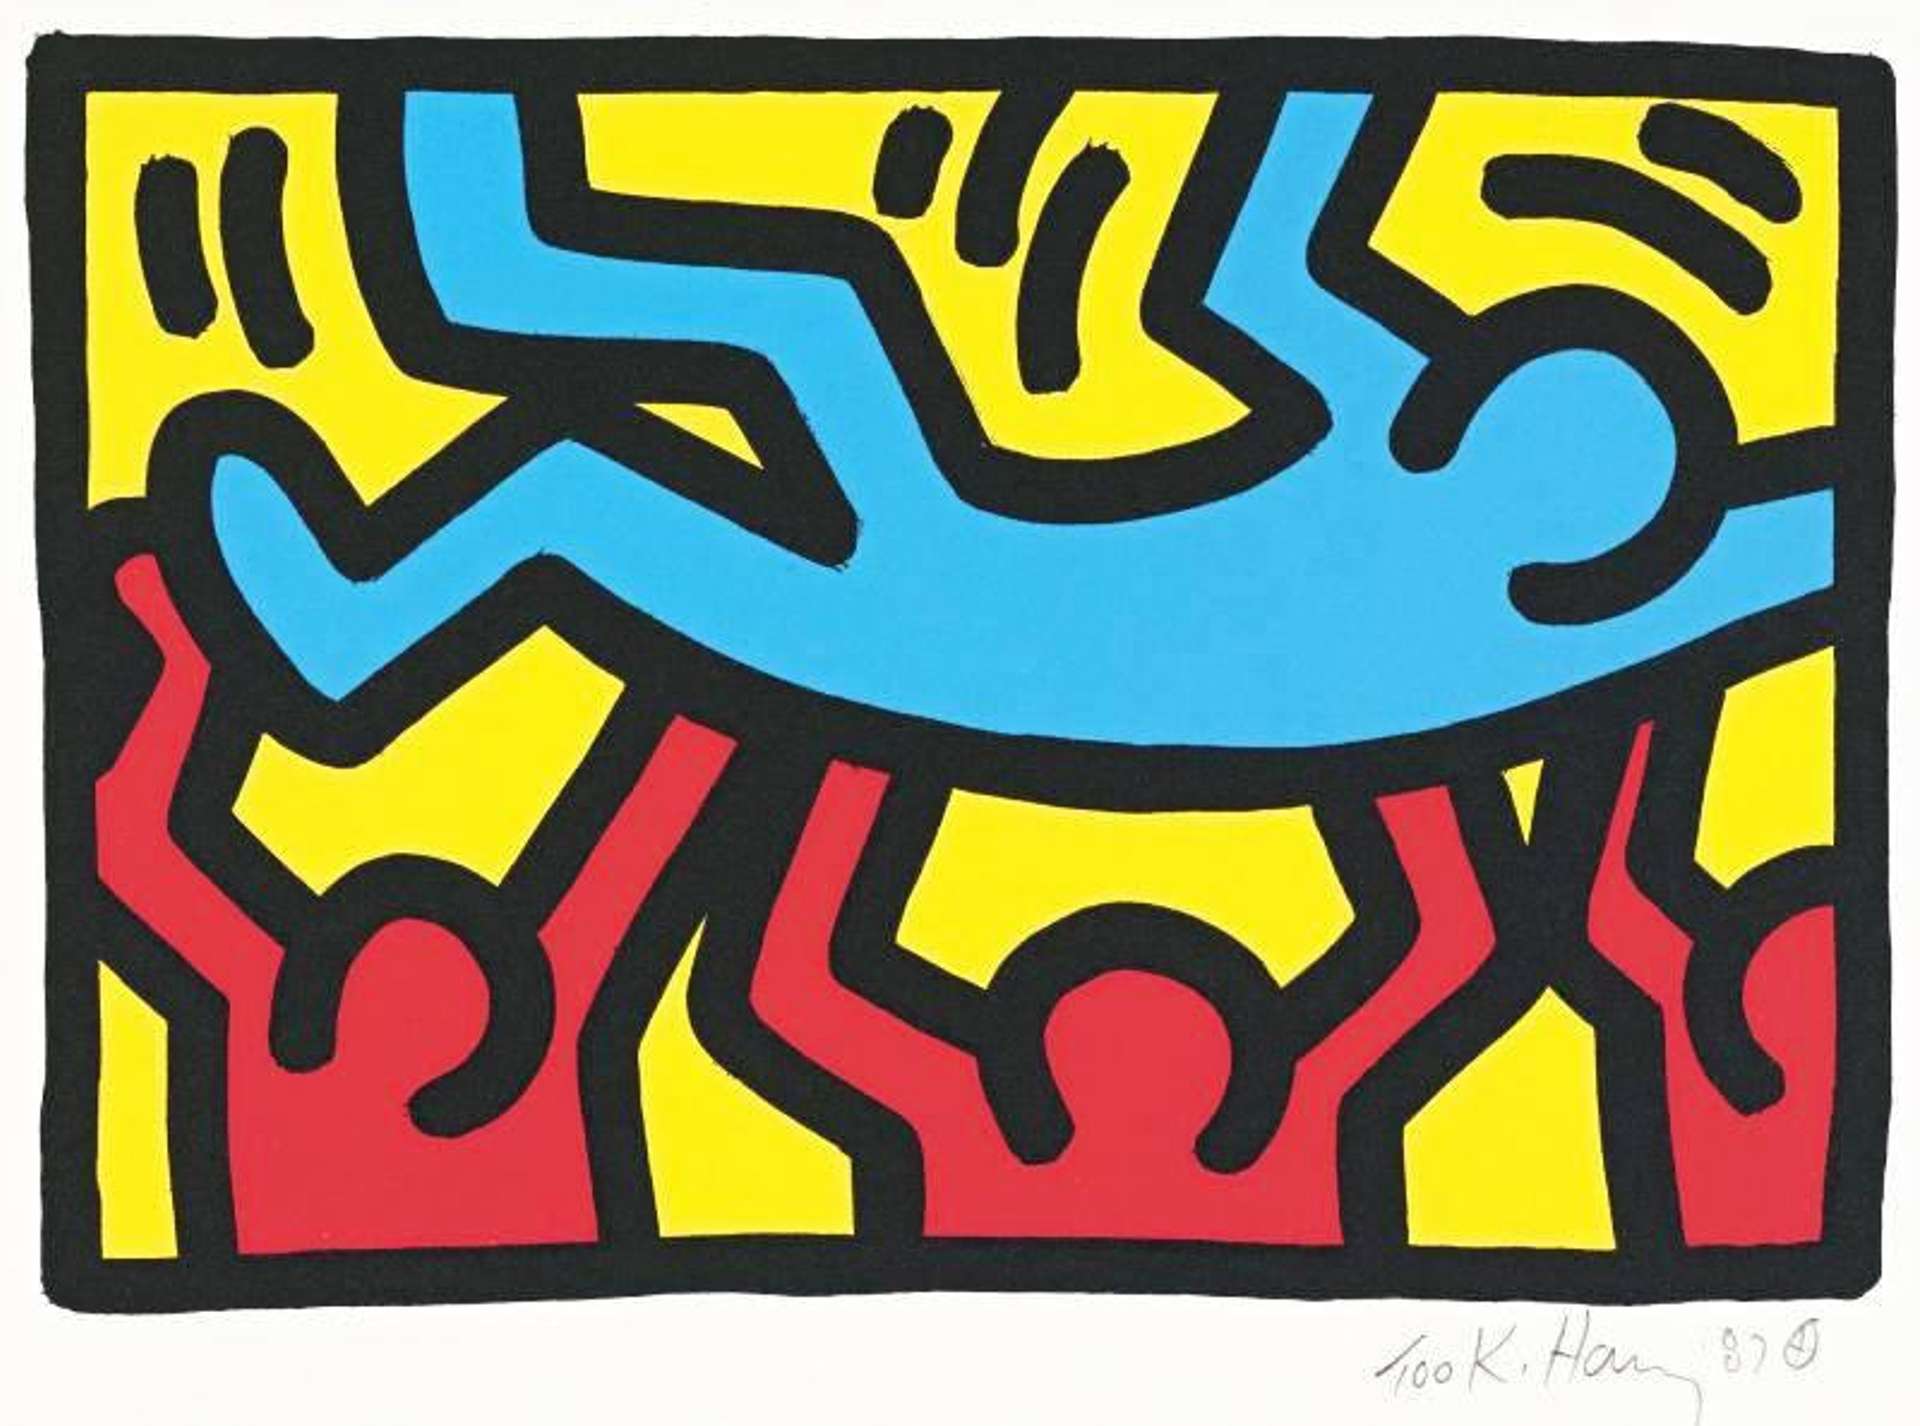 Untitled 1987 - Signed Print by Keith Haring 1987 - MyArtBroker